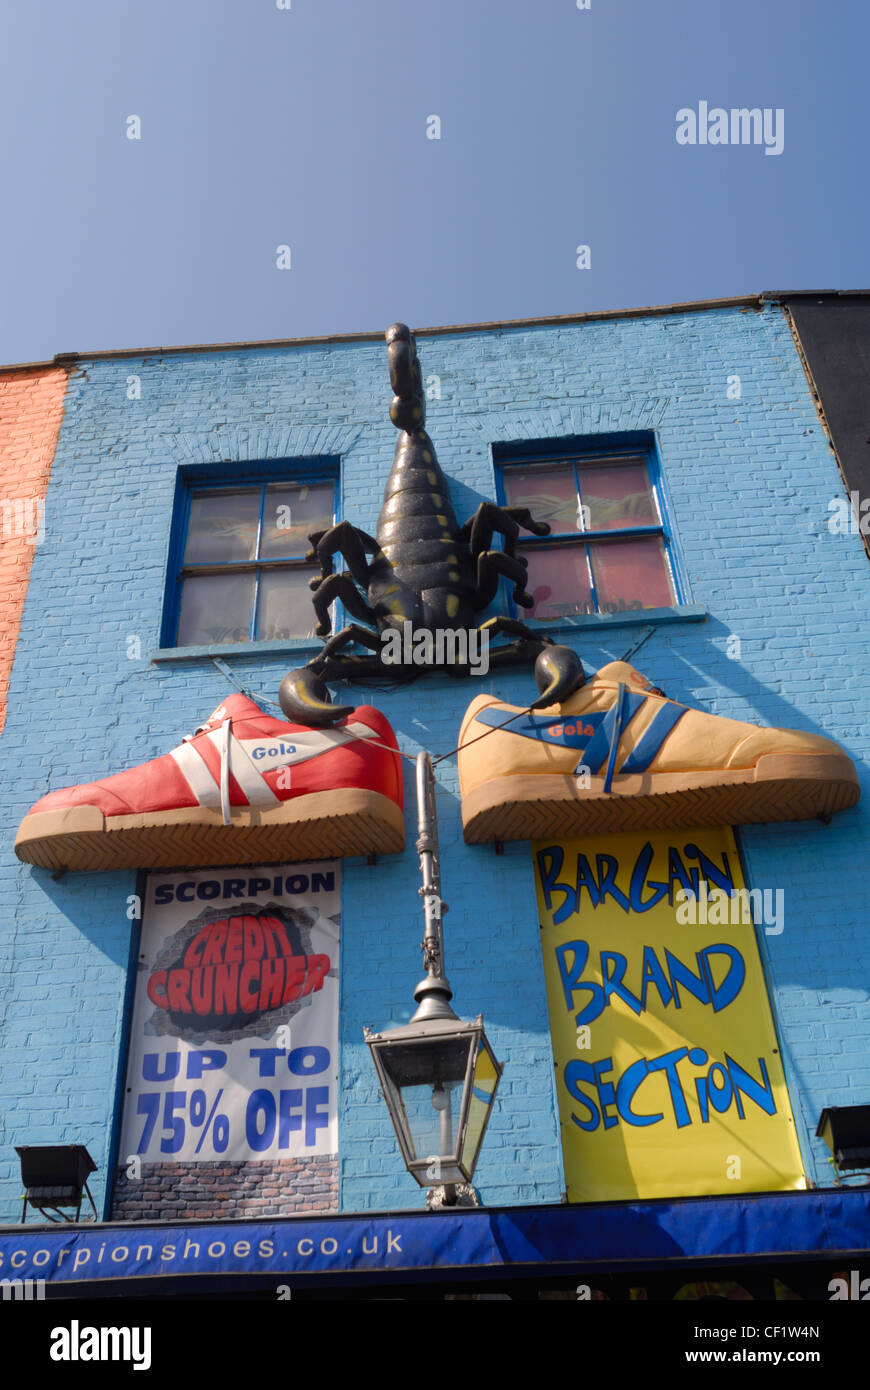 Models of two giant training shoes and a scorpion adorn a shop front in Camden High Street near the market. Stock Photo